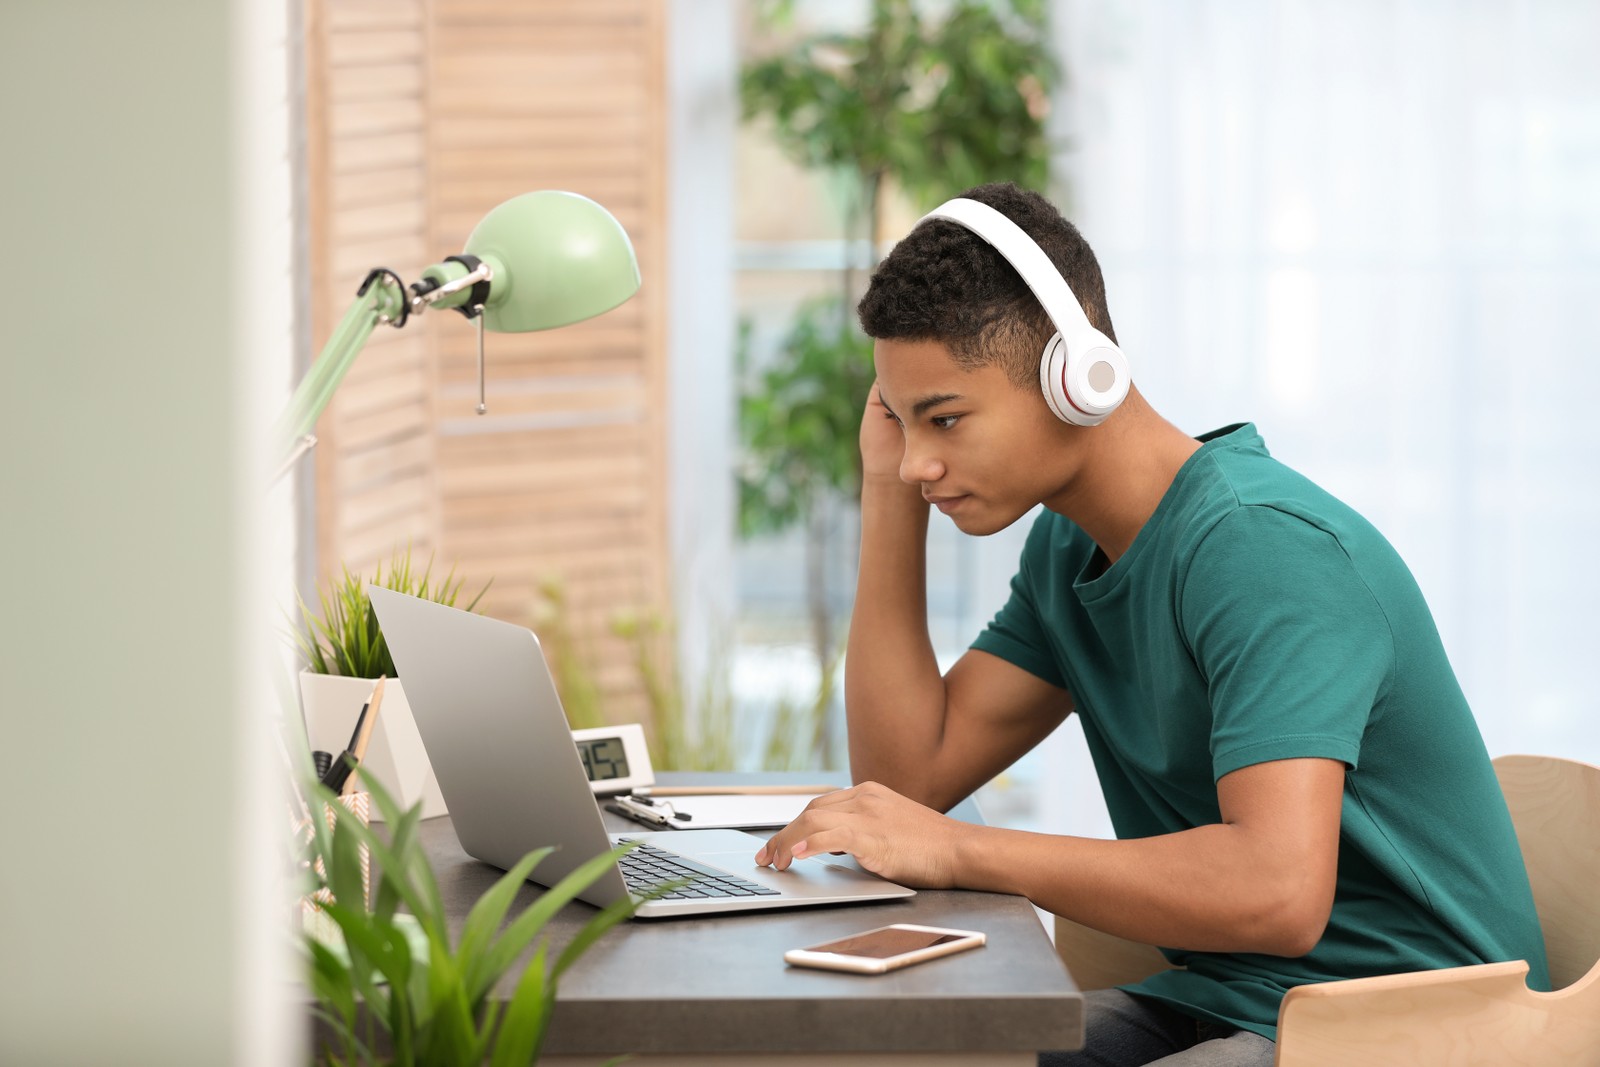 Photo of African-American teenage boy with headphones using laptop at table in room